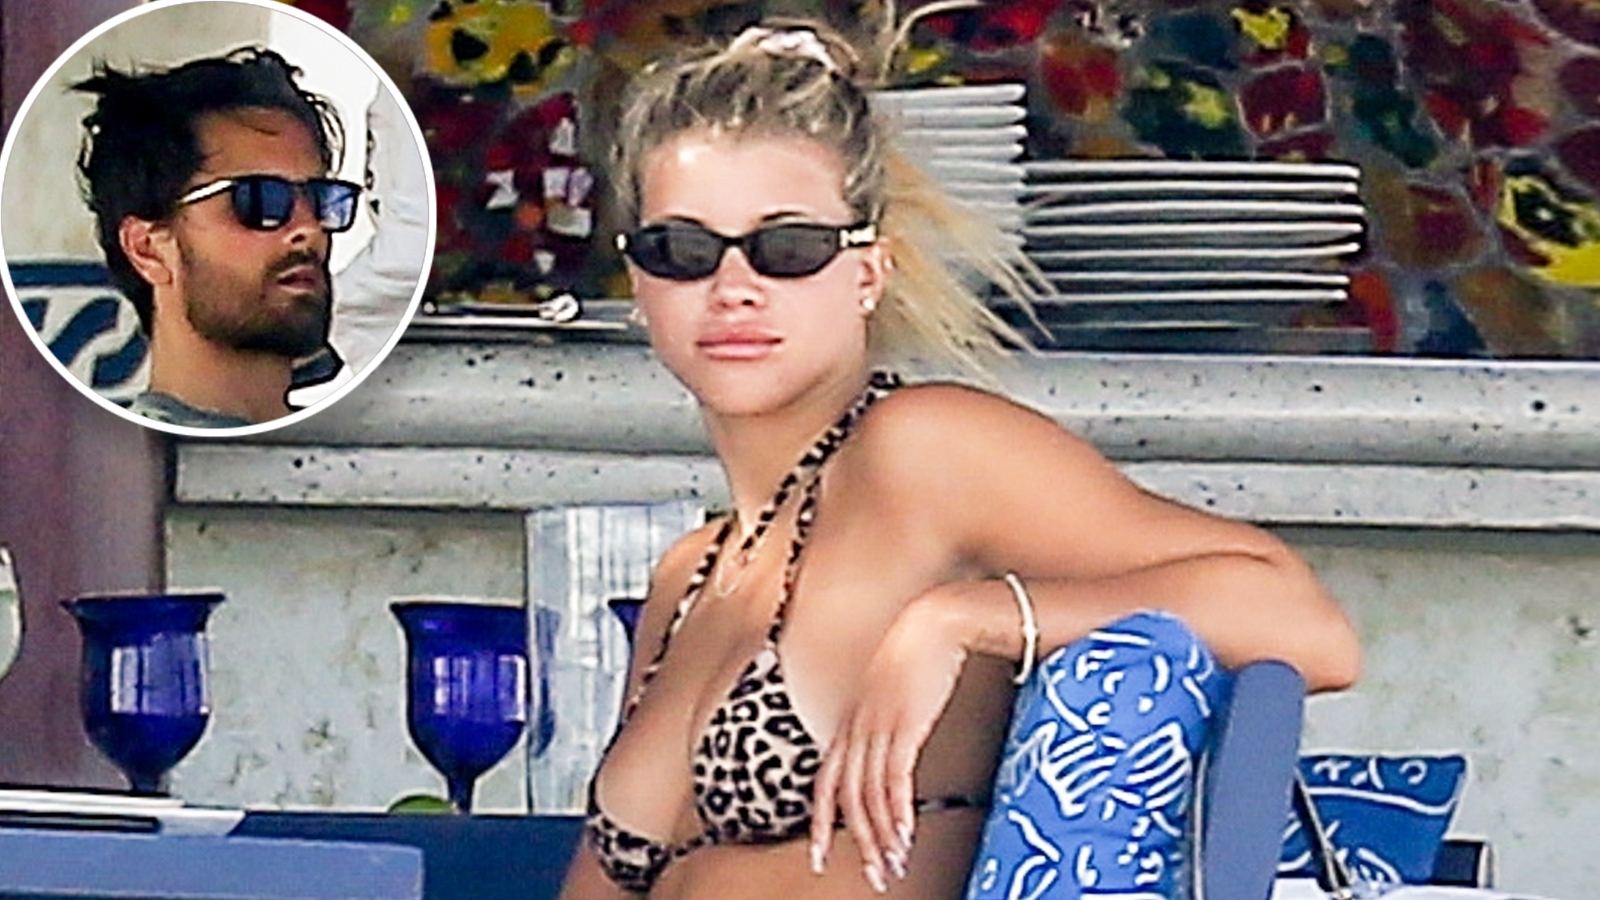 Scott Disick and Sofia Richie Enjoy a Relaxing Lunch in Mexico